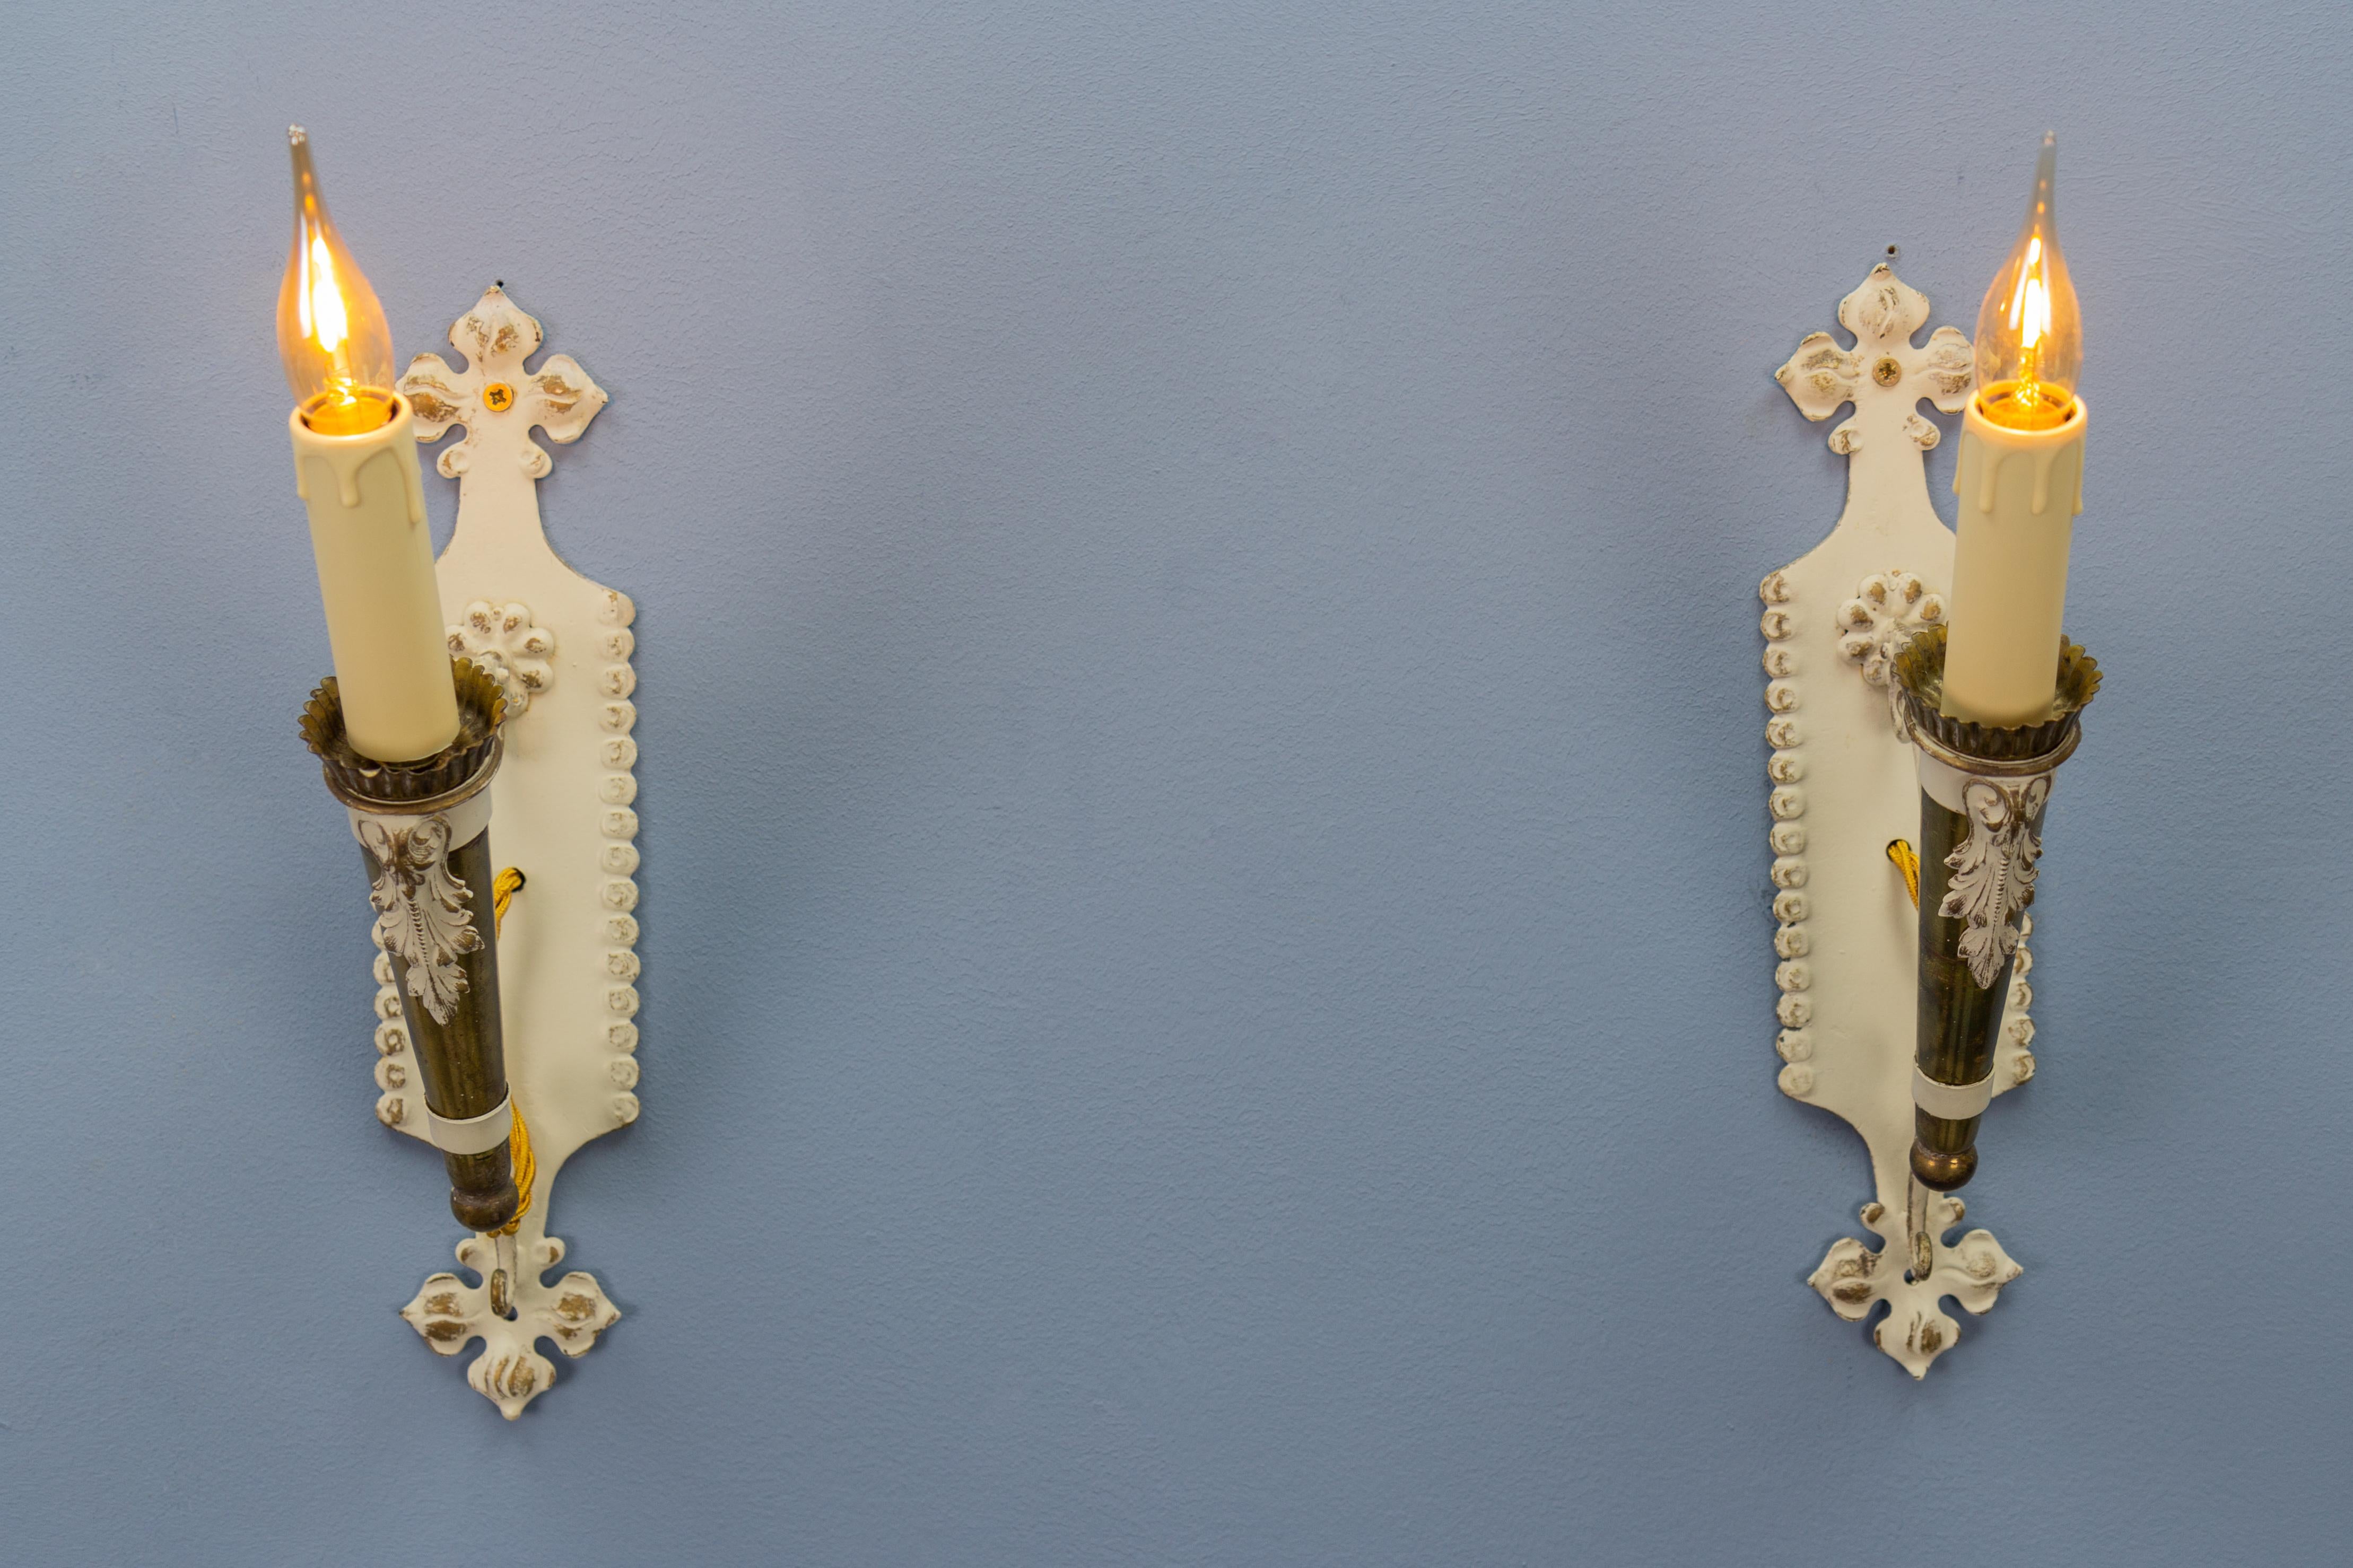 Pair of Italian vintage white and golden metal torch-shaped wall sconces from ca. 1950s.
An adorable pair of Italian single-arm torch-shaped metal wall sconces, beautifully painted in white with golden accents and ornate backplates. Each sconce has